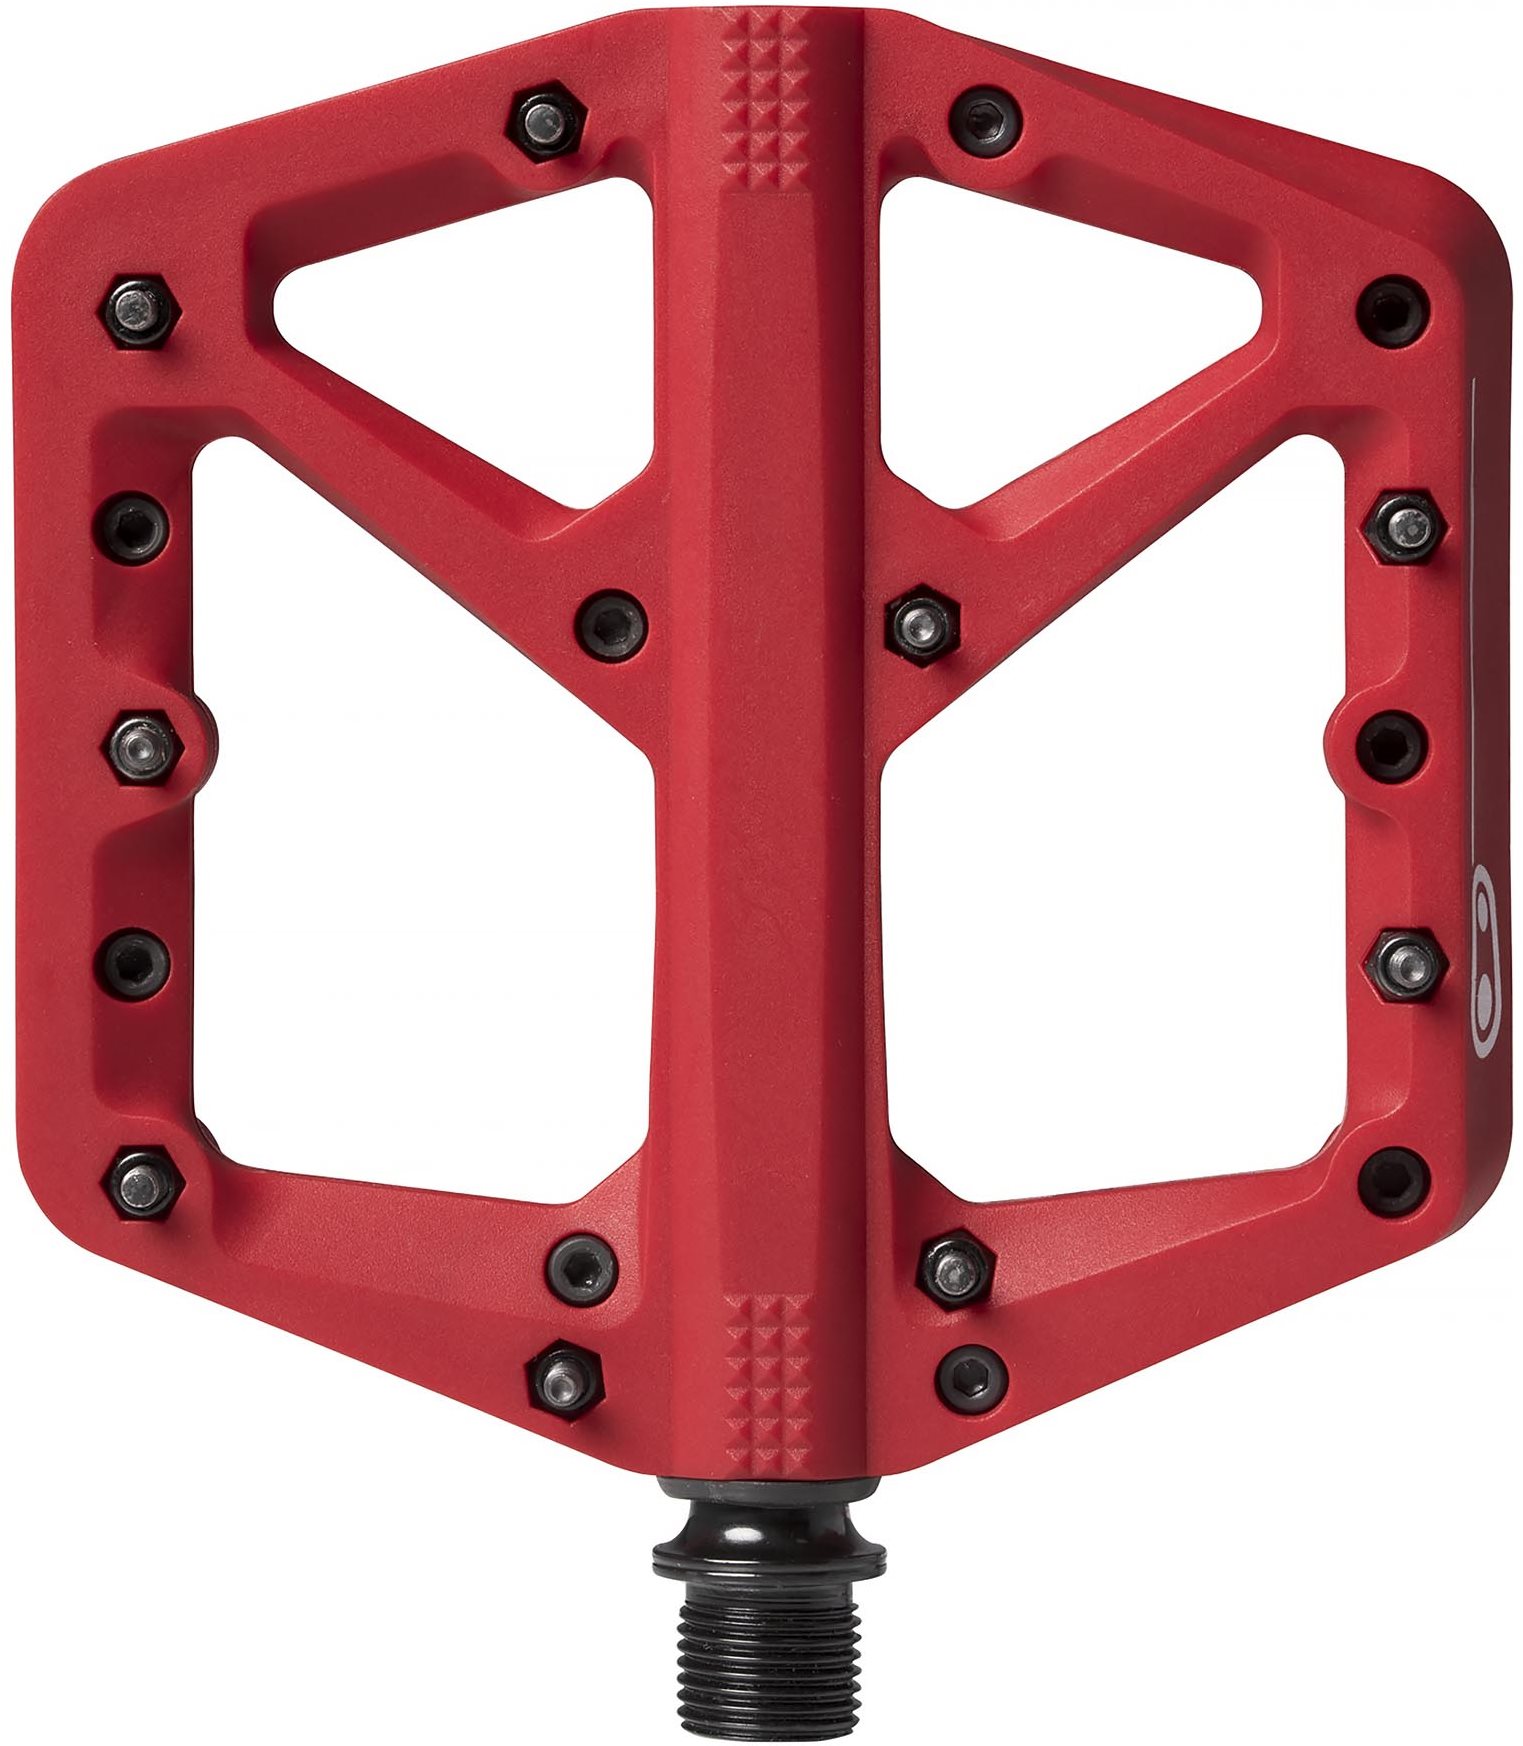 Pedál Crankbrothers Stamp 1 Large Red